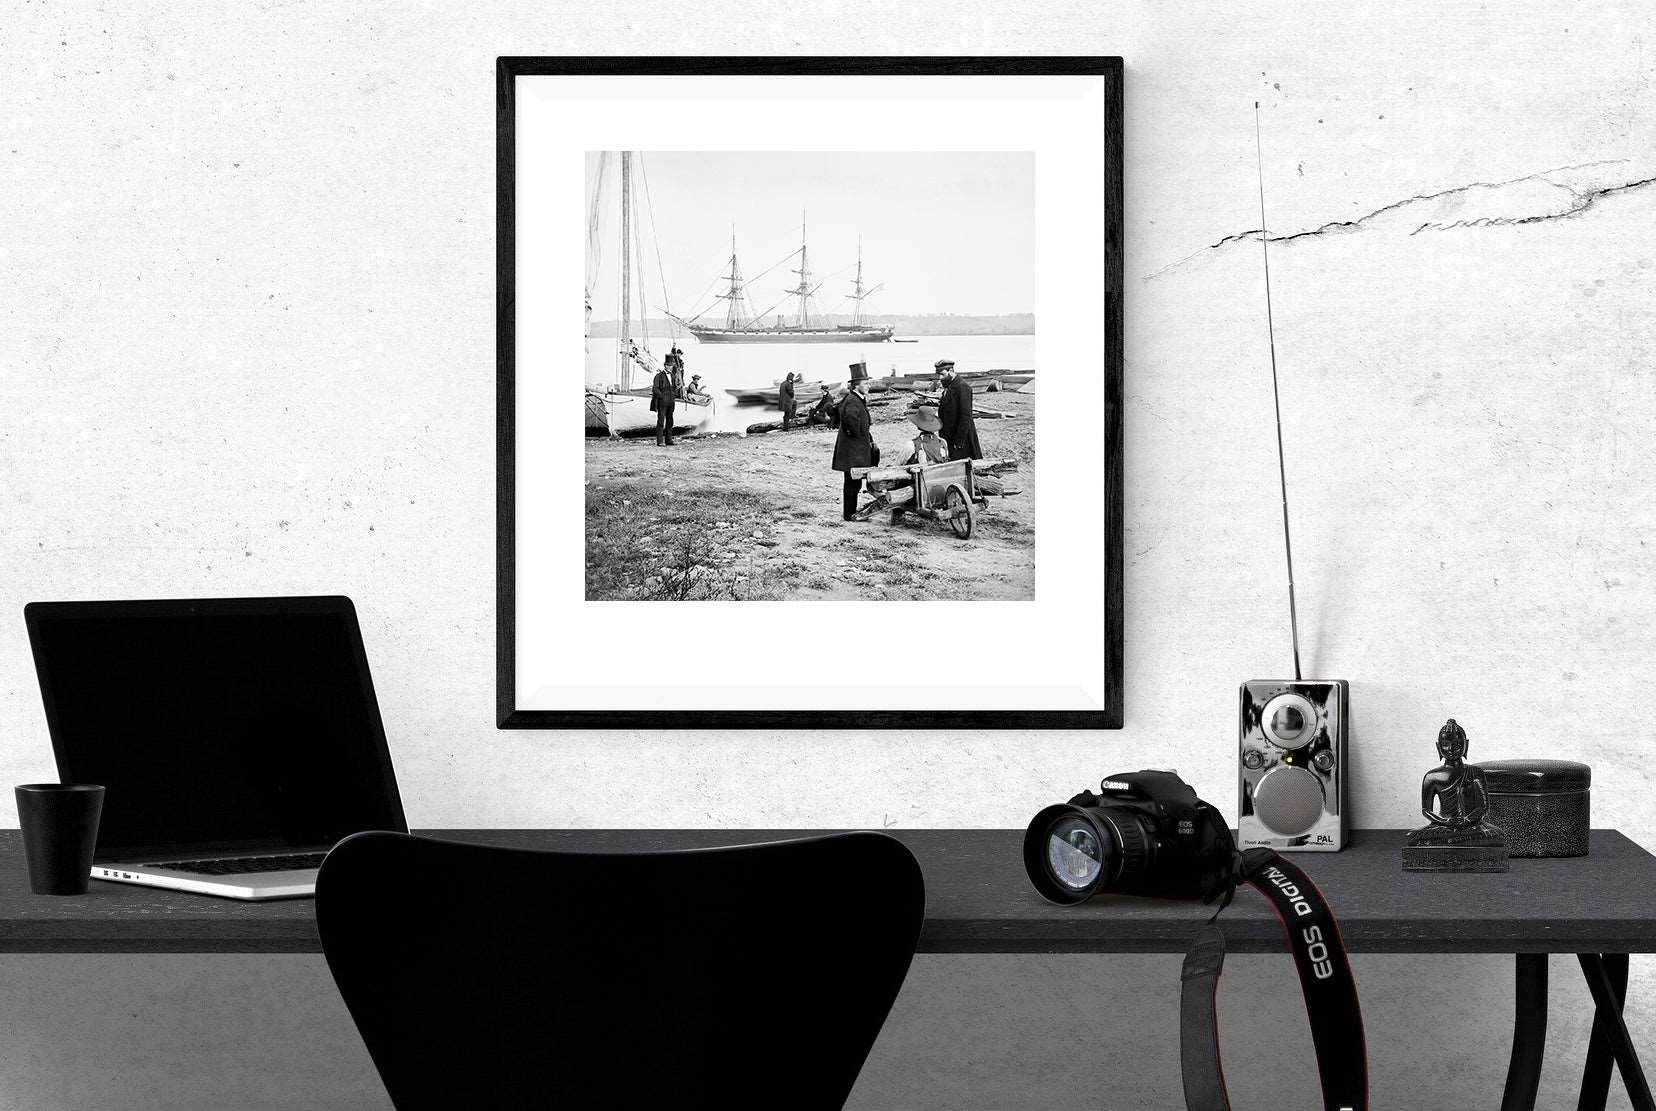 A rendering of a desk space with a framed vintage photograph hanging on the wall